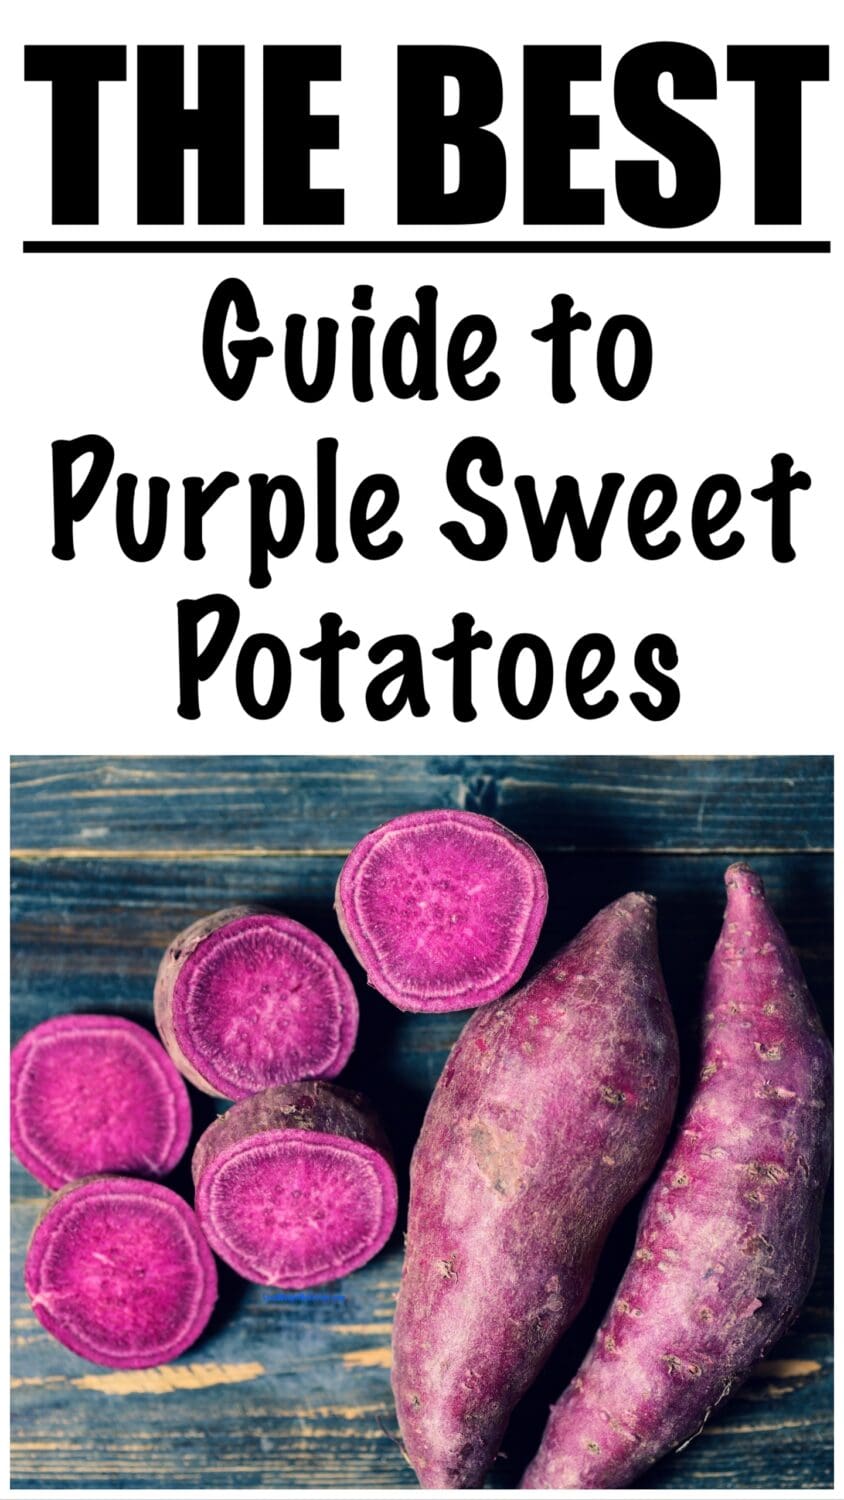 Nutrition and Calories in Purple Sweet Potatoes